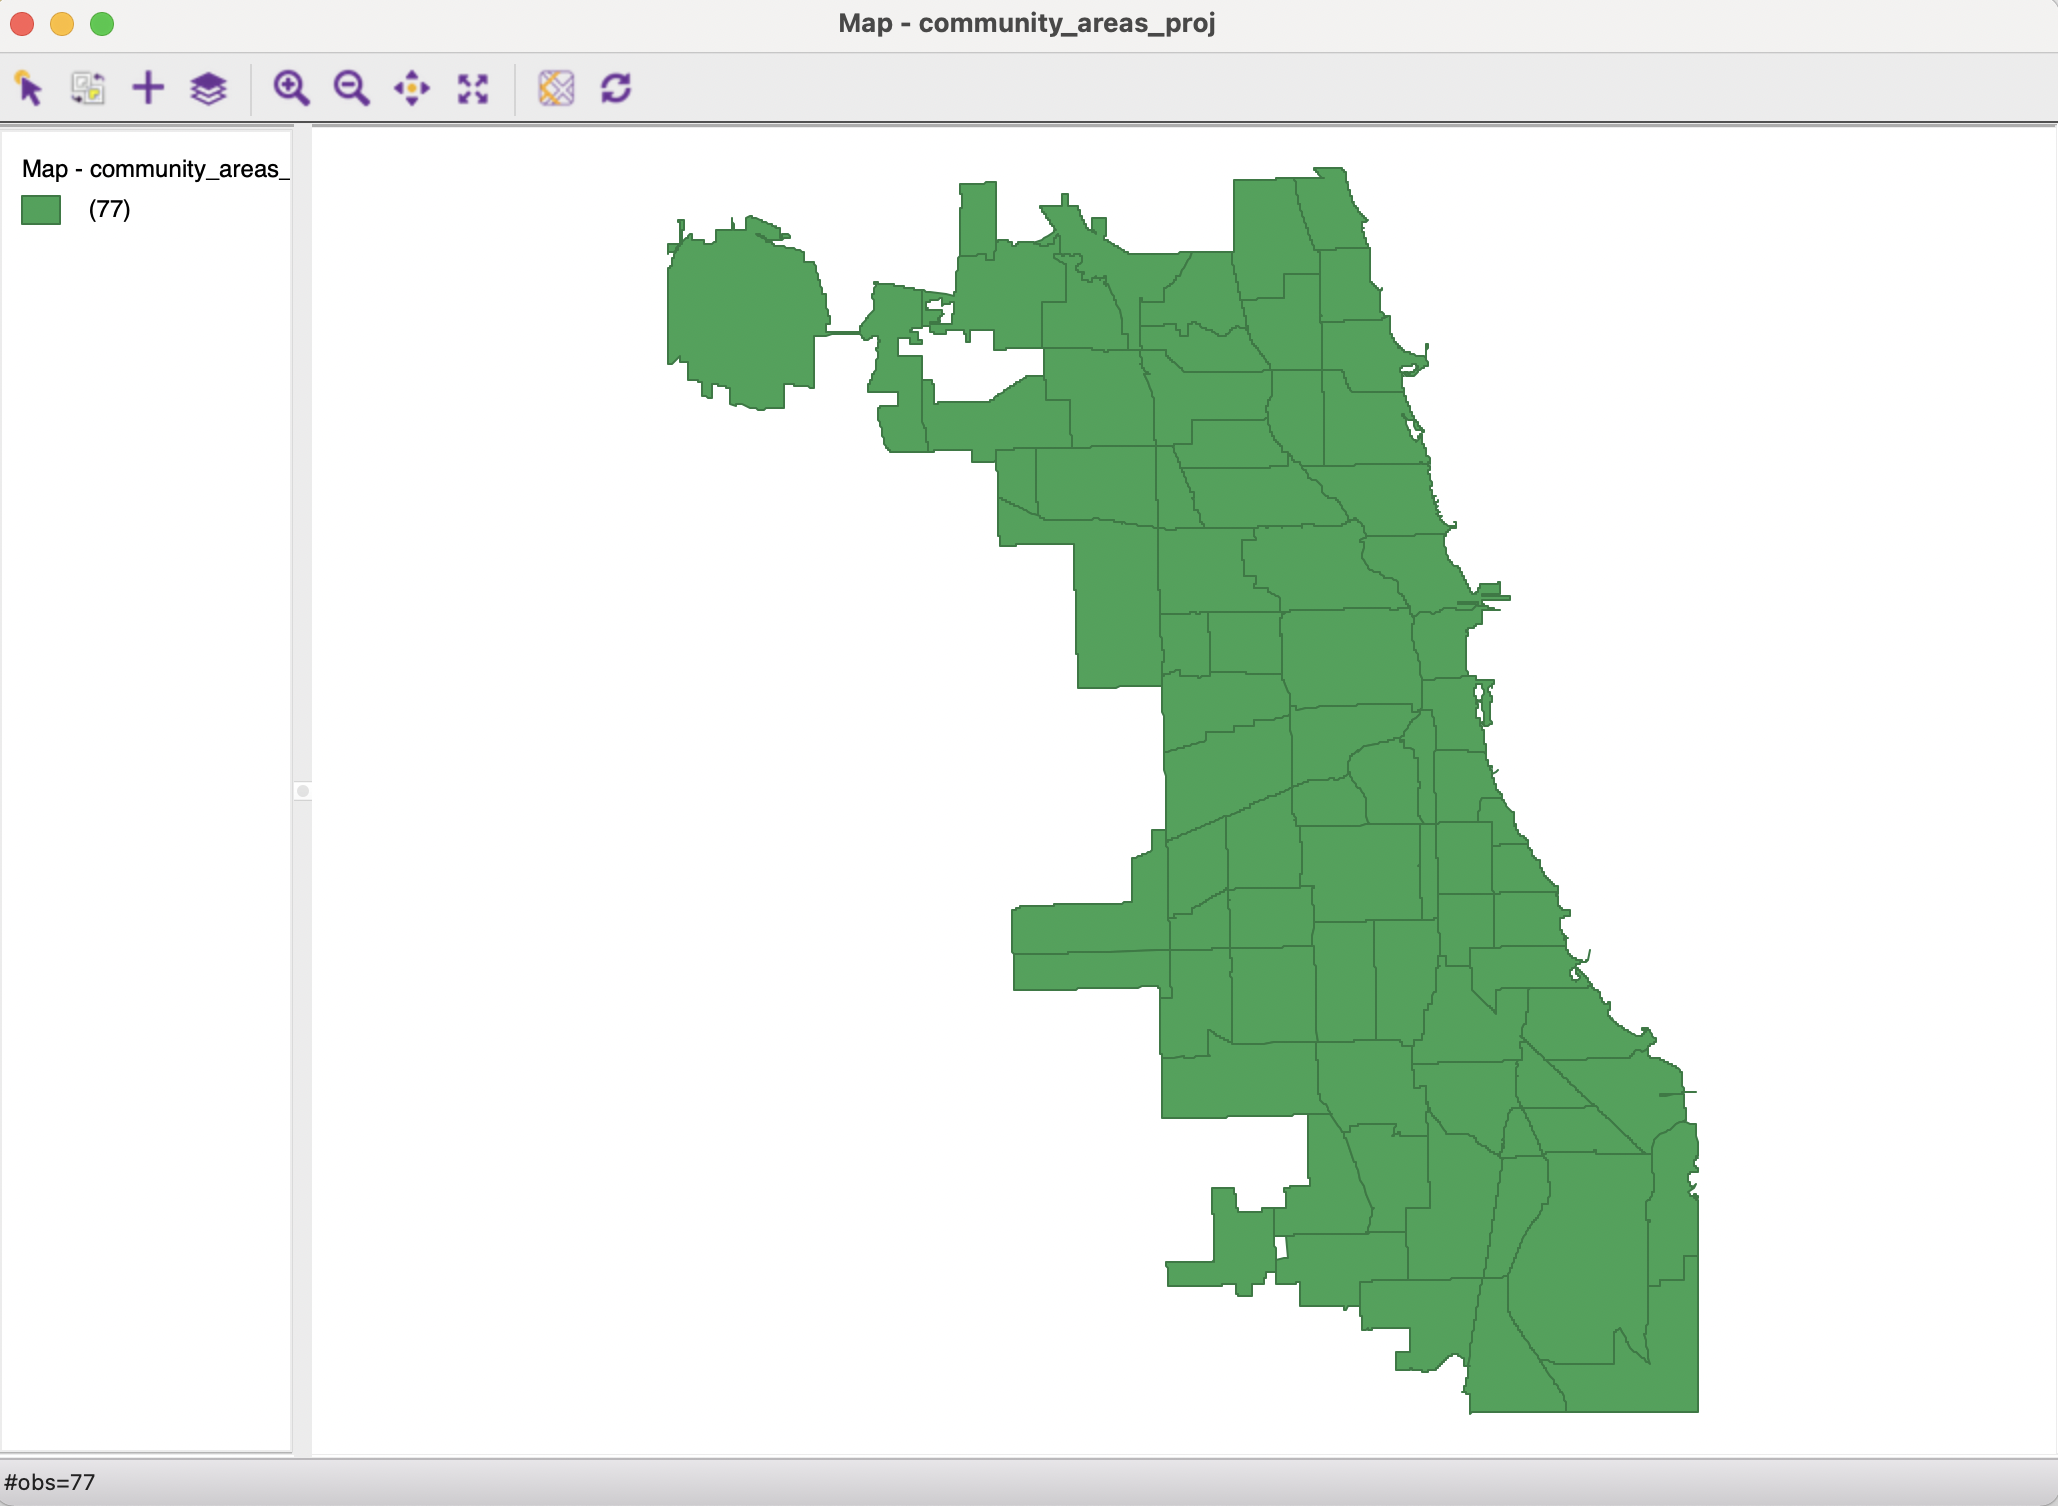 Reprojected Chicago community areas layer